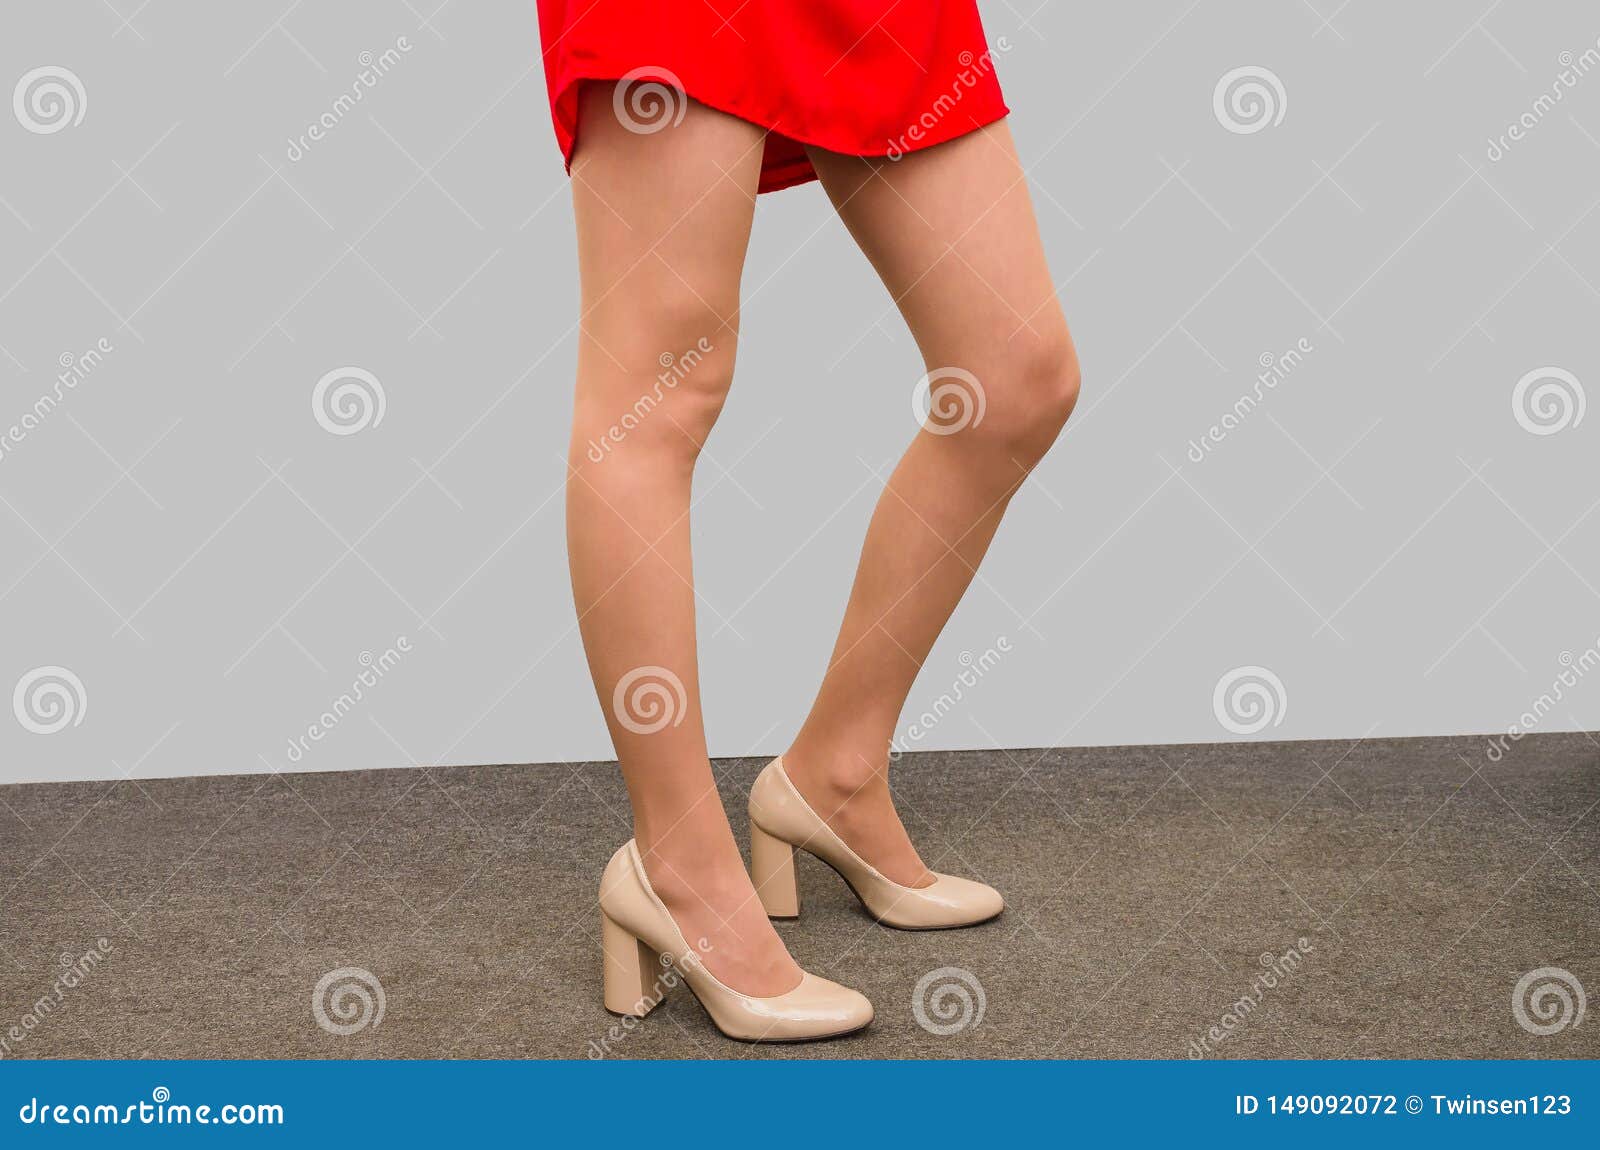 Woman's Legs Red Image & Photo (Free Trial)